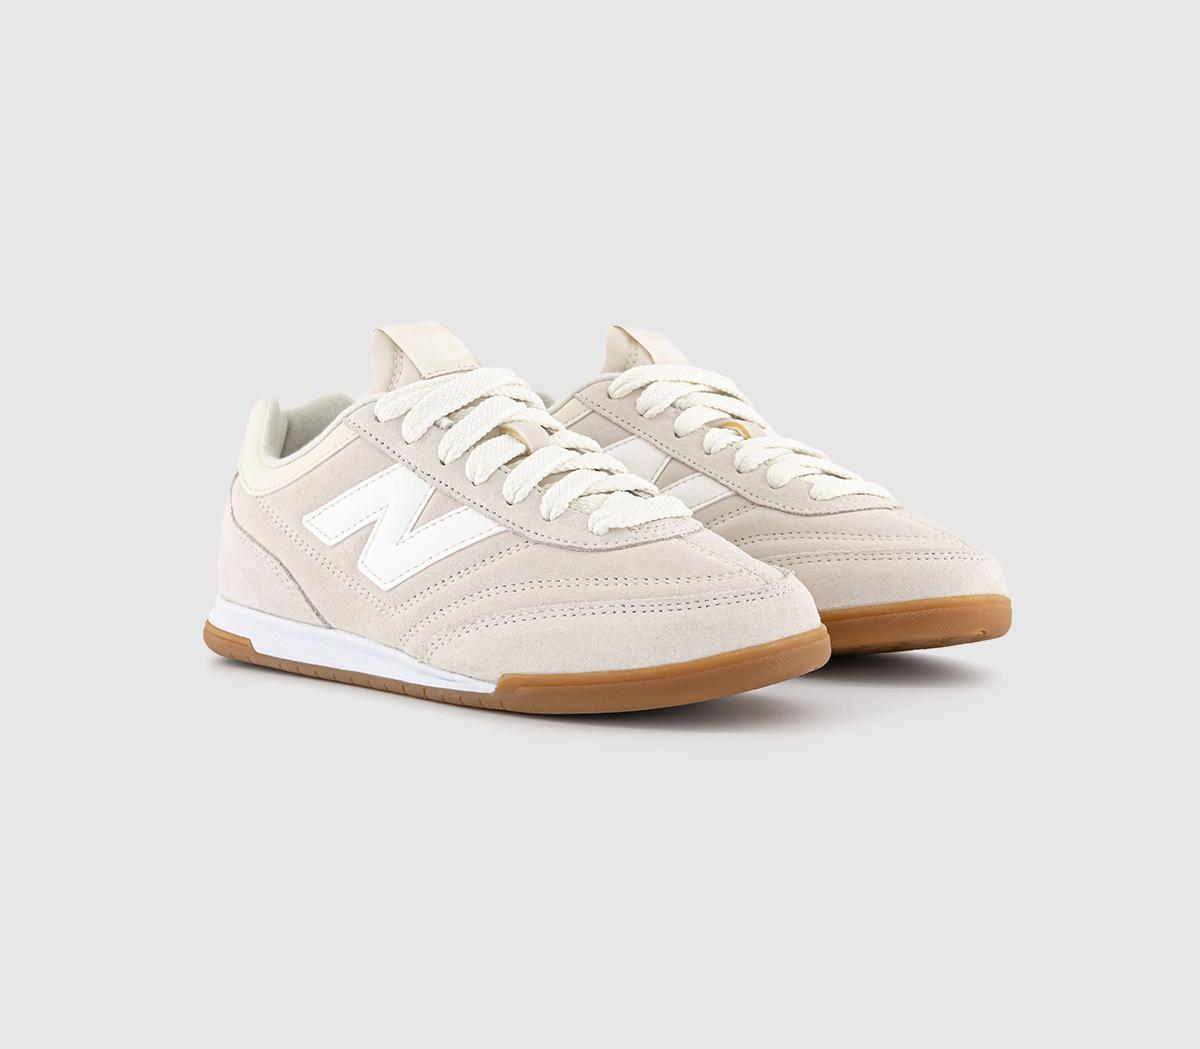 New Balance Mens RC42 Trainers Beige Suede Natural, 6